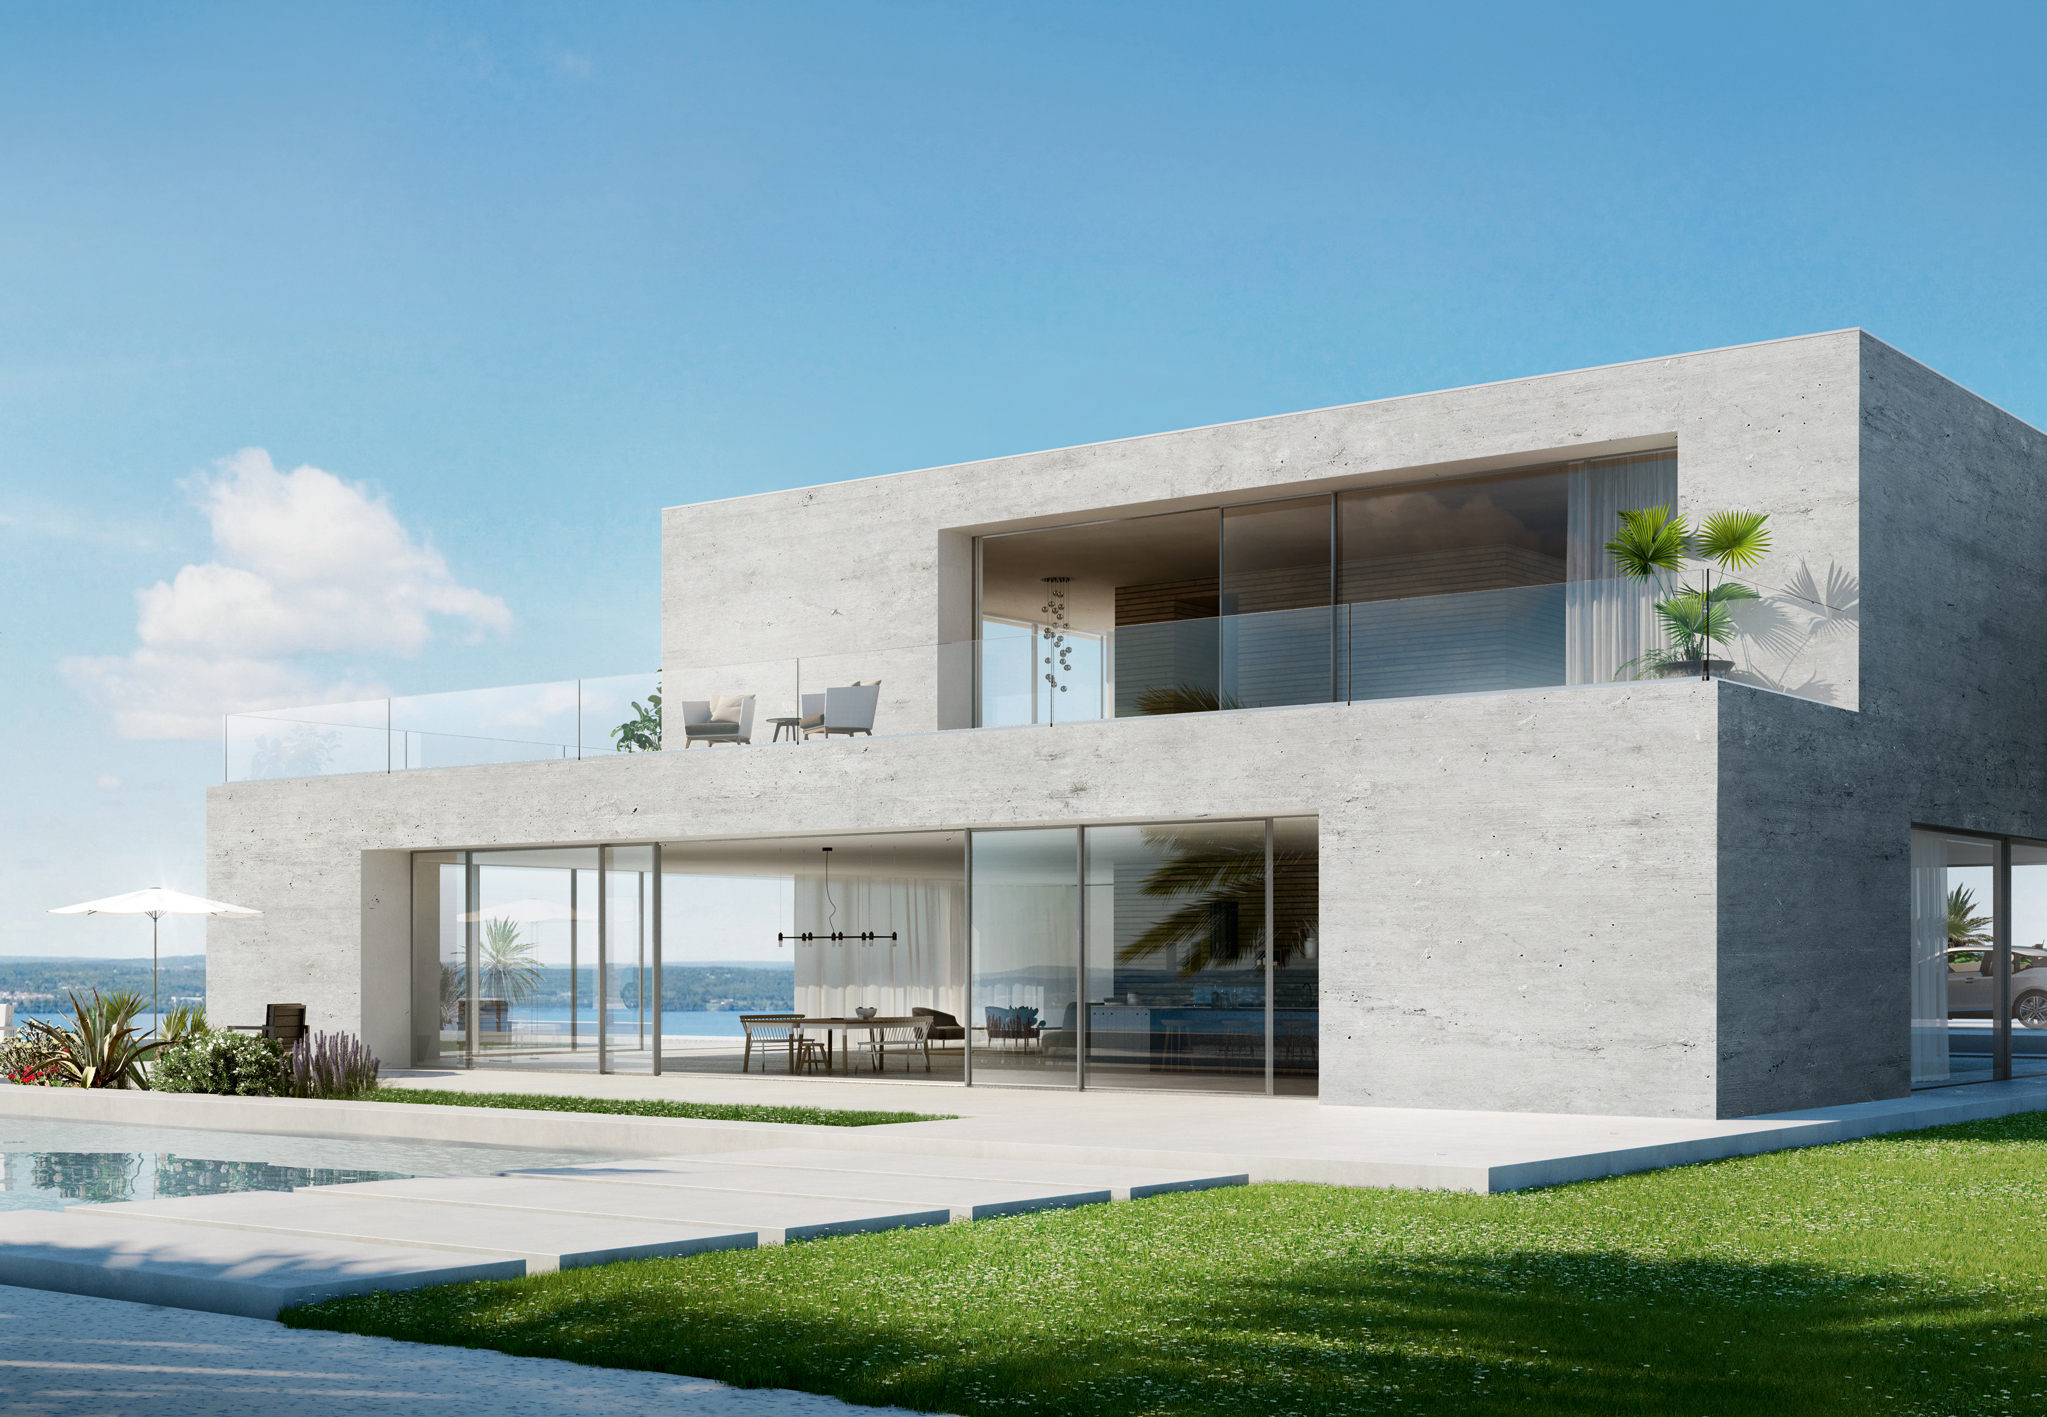 SCHUECO’S NEW PANORAMIC SLIDING DOOR OFFERS SLIM SIGHTLINES AND MAXIMUM TRANSPARENCY